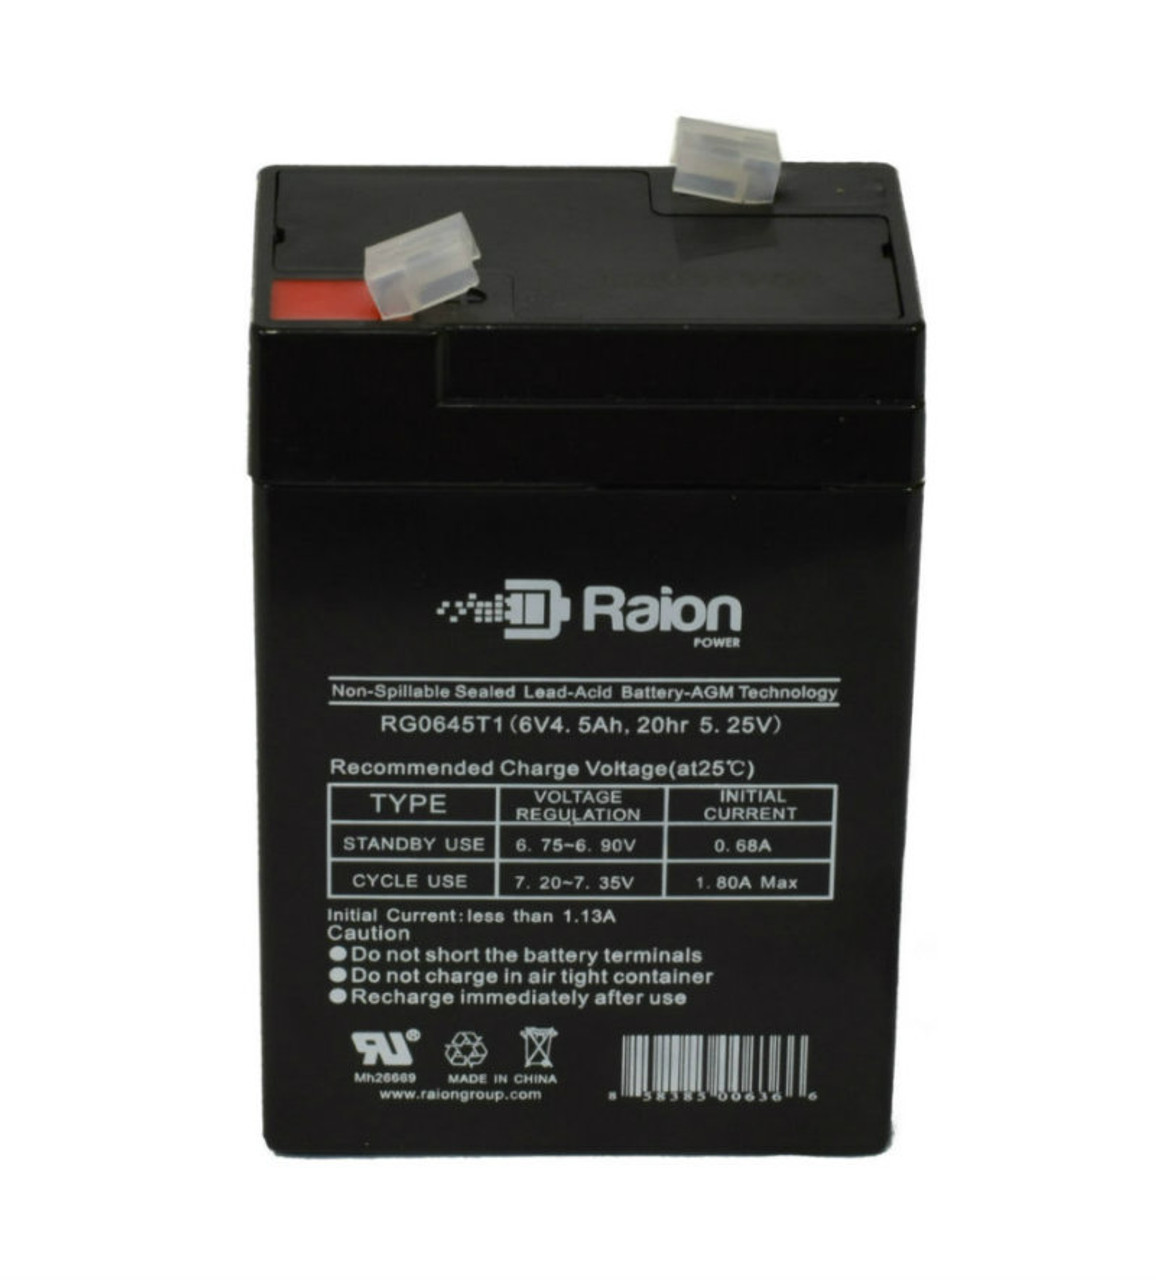 Raion Power RG0645T1 Replacement Battery Cartridge for Starlight SA6-4